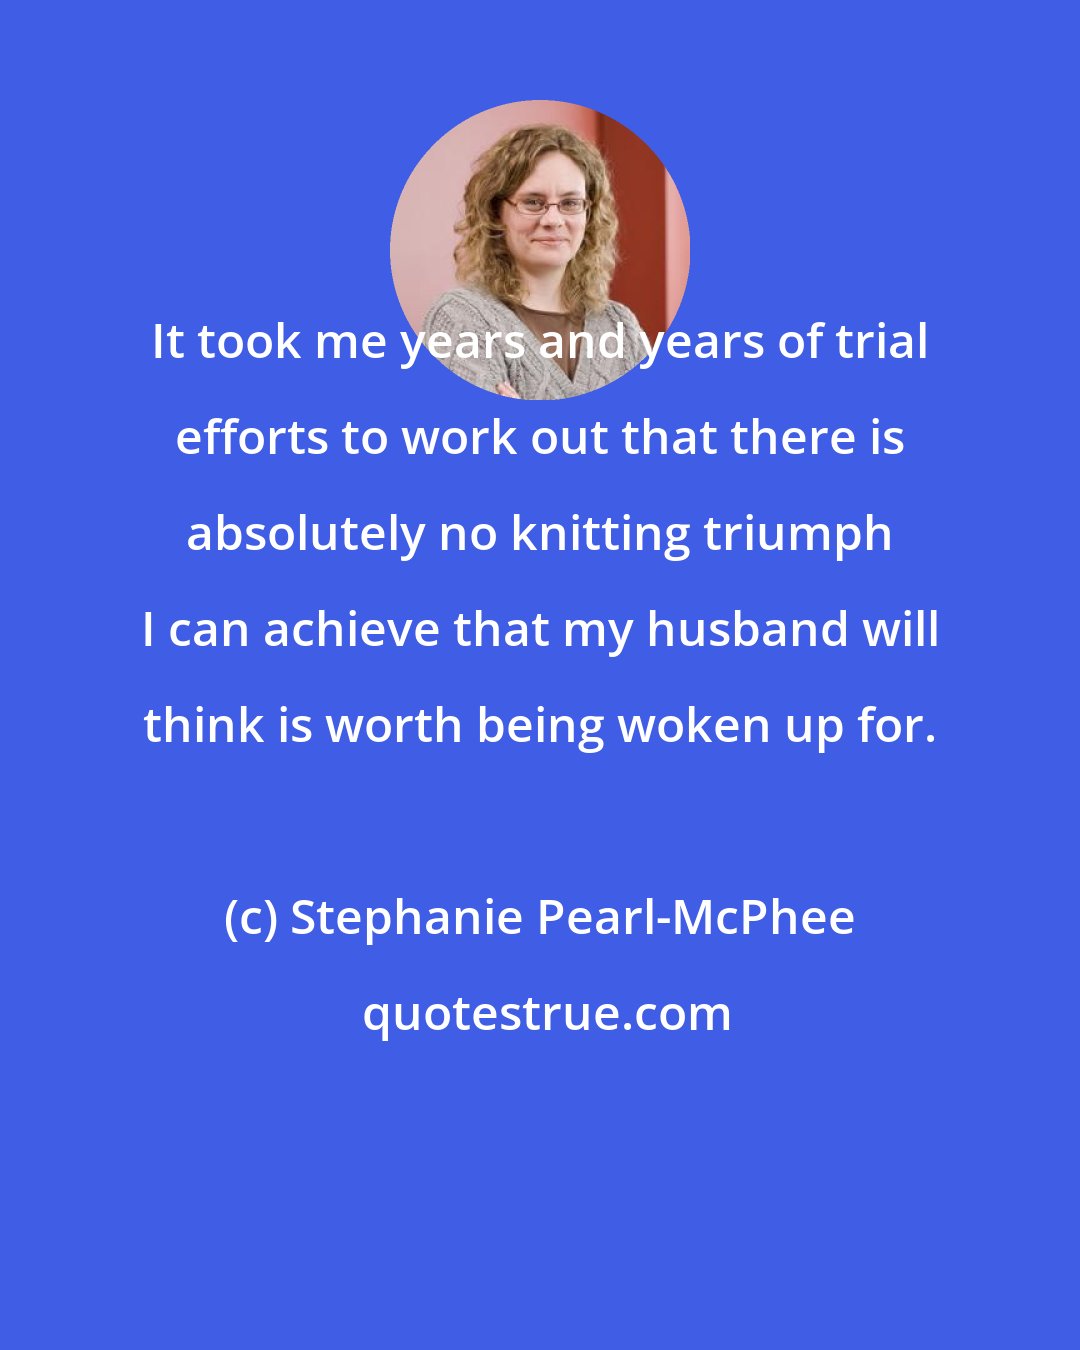 Stephanie Pearl-McPhee: It took me years and years of trial efforts to work out that there is absolutely no knitting triumph I can achieve that my husband will think is worth being woken up for.